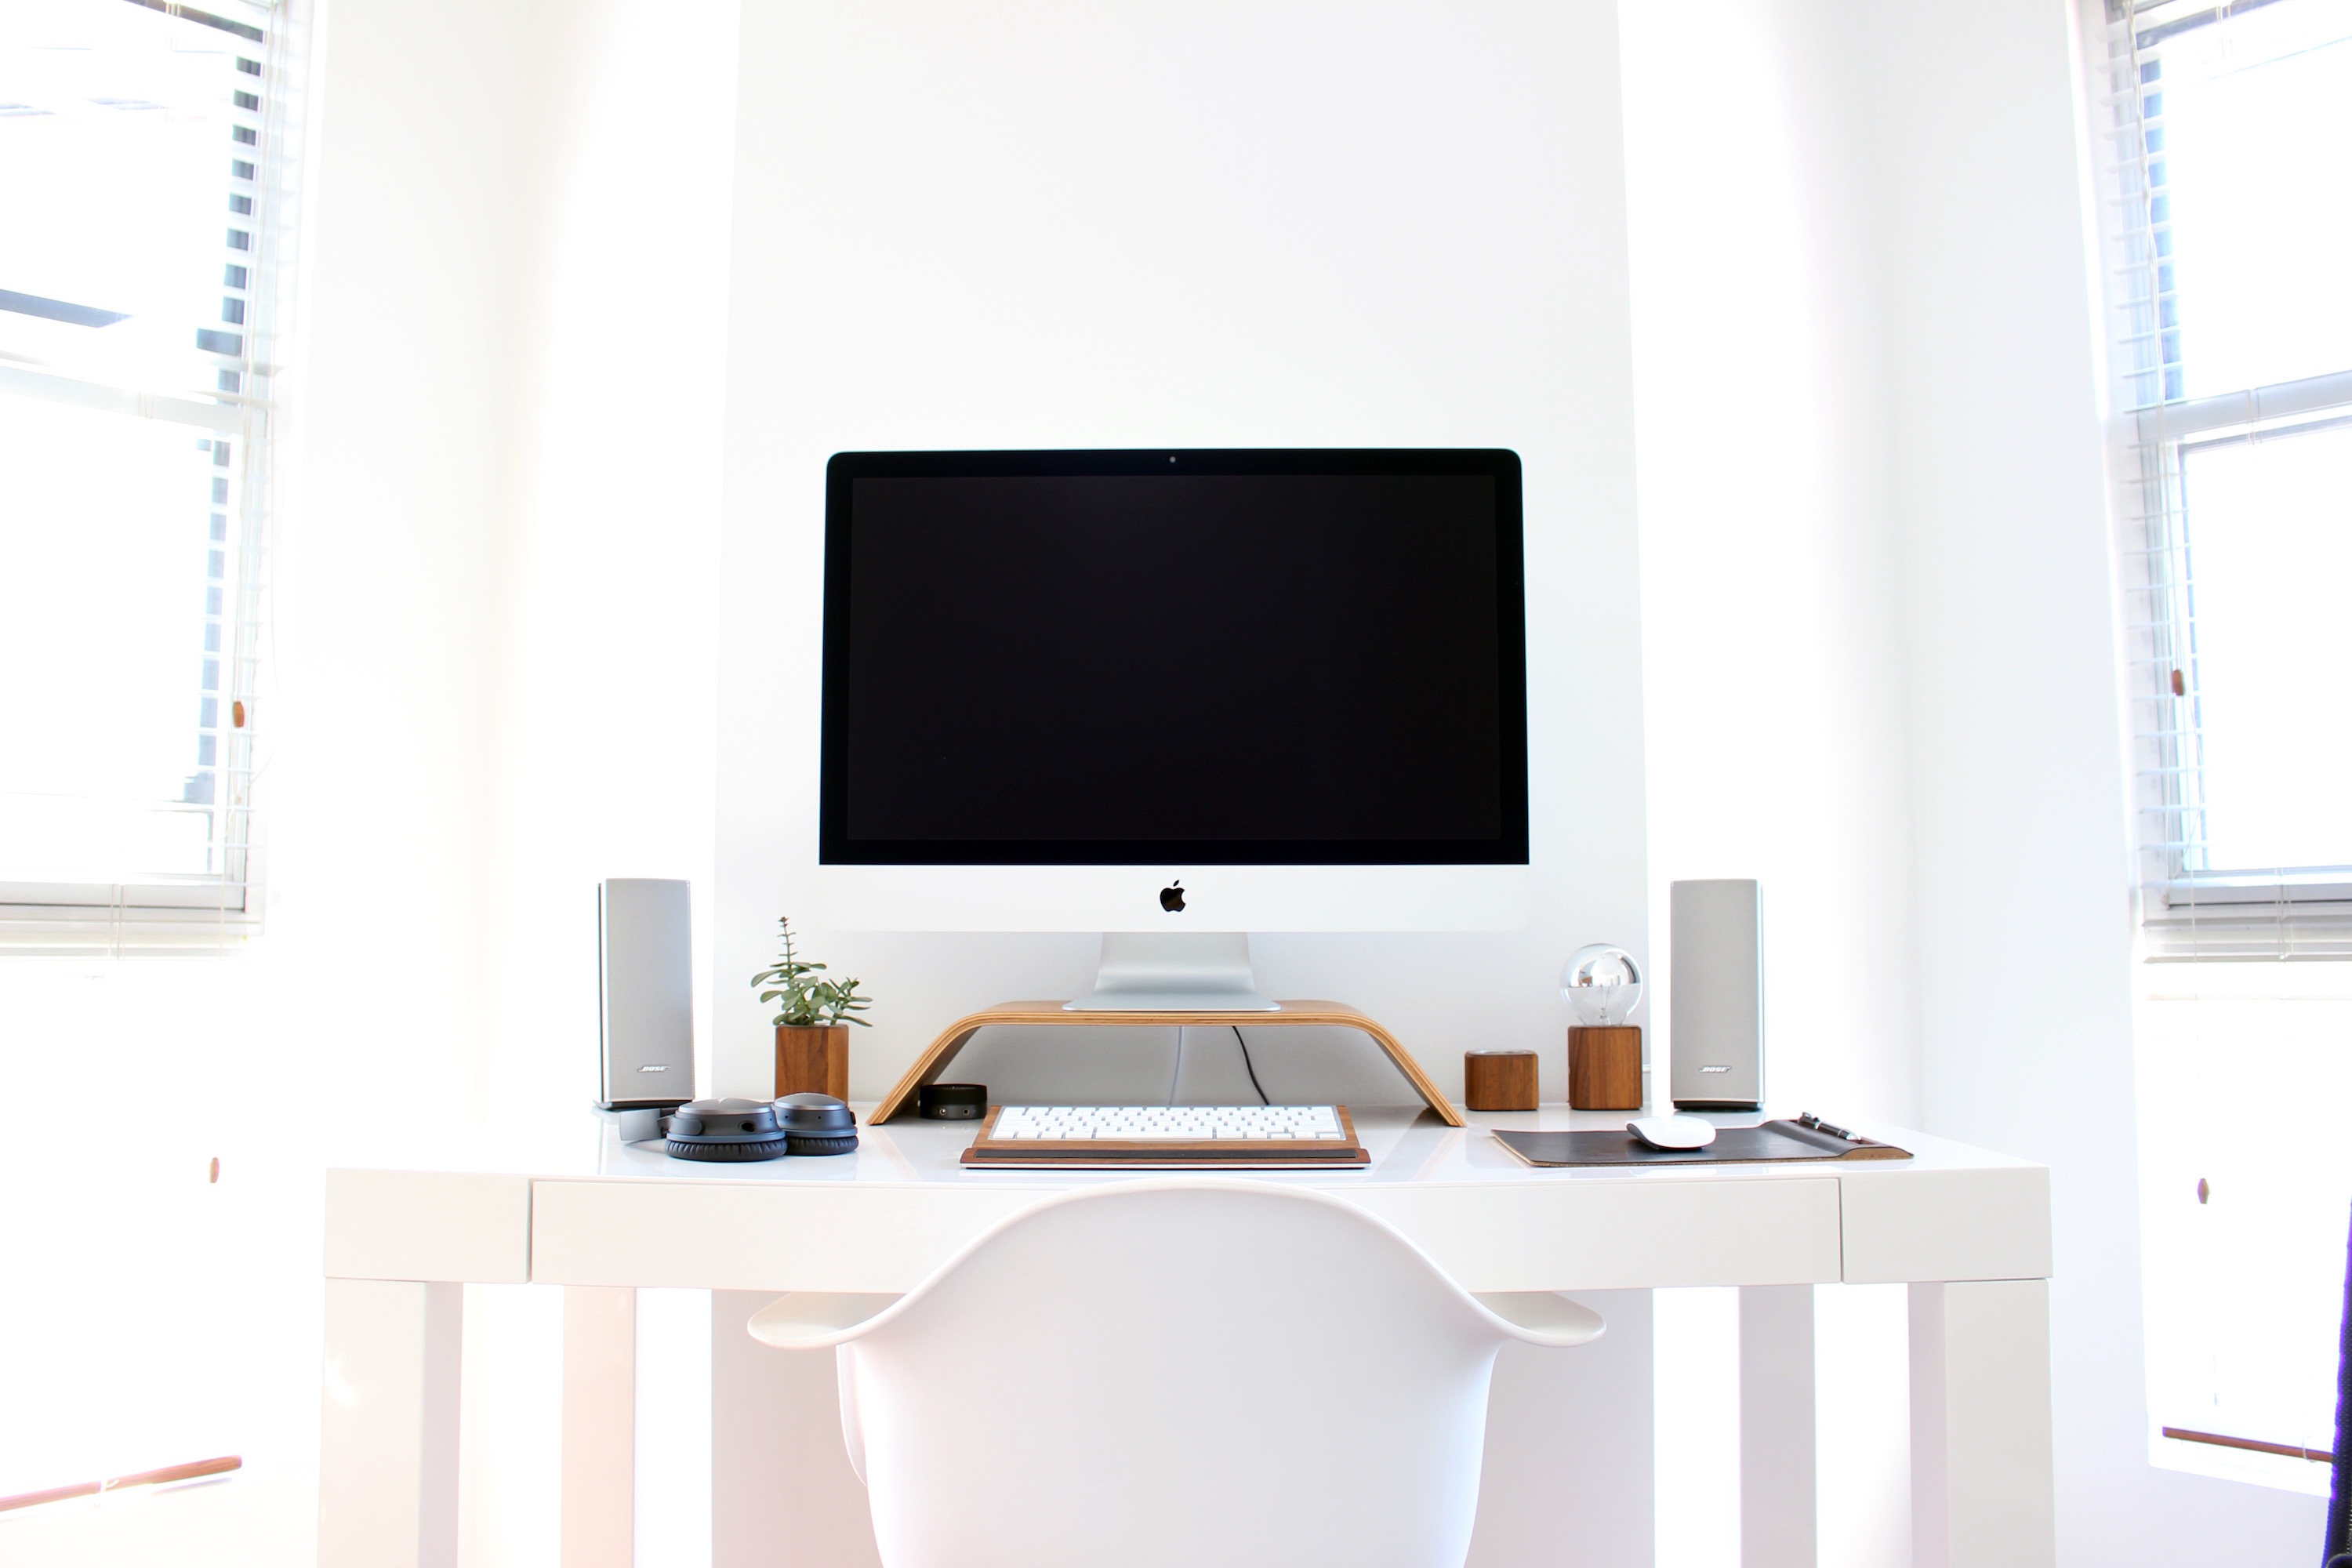 A very bright, modern, minimalistic office with an iMac computer sitting on a desk.